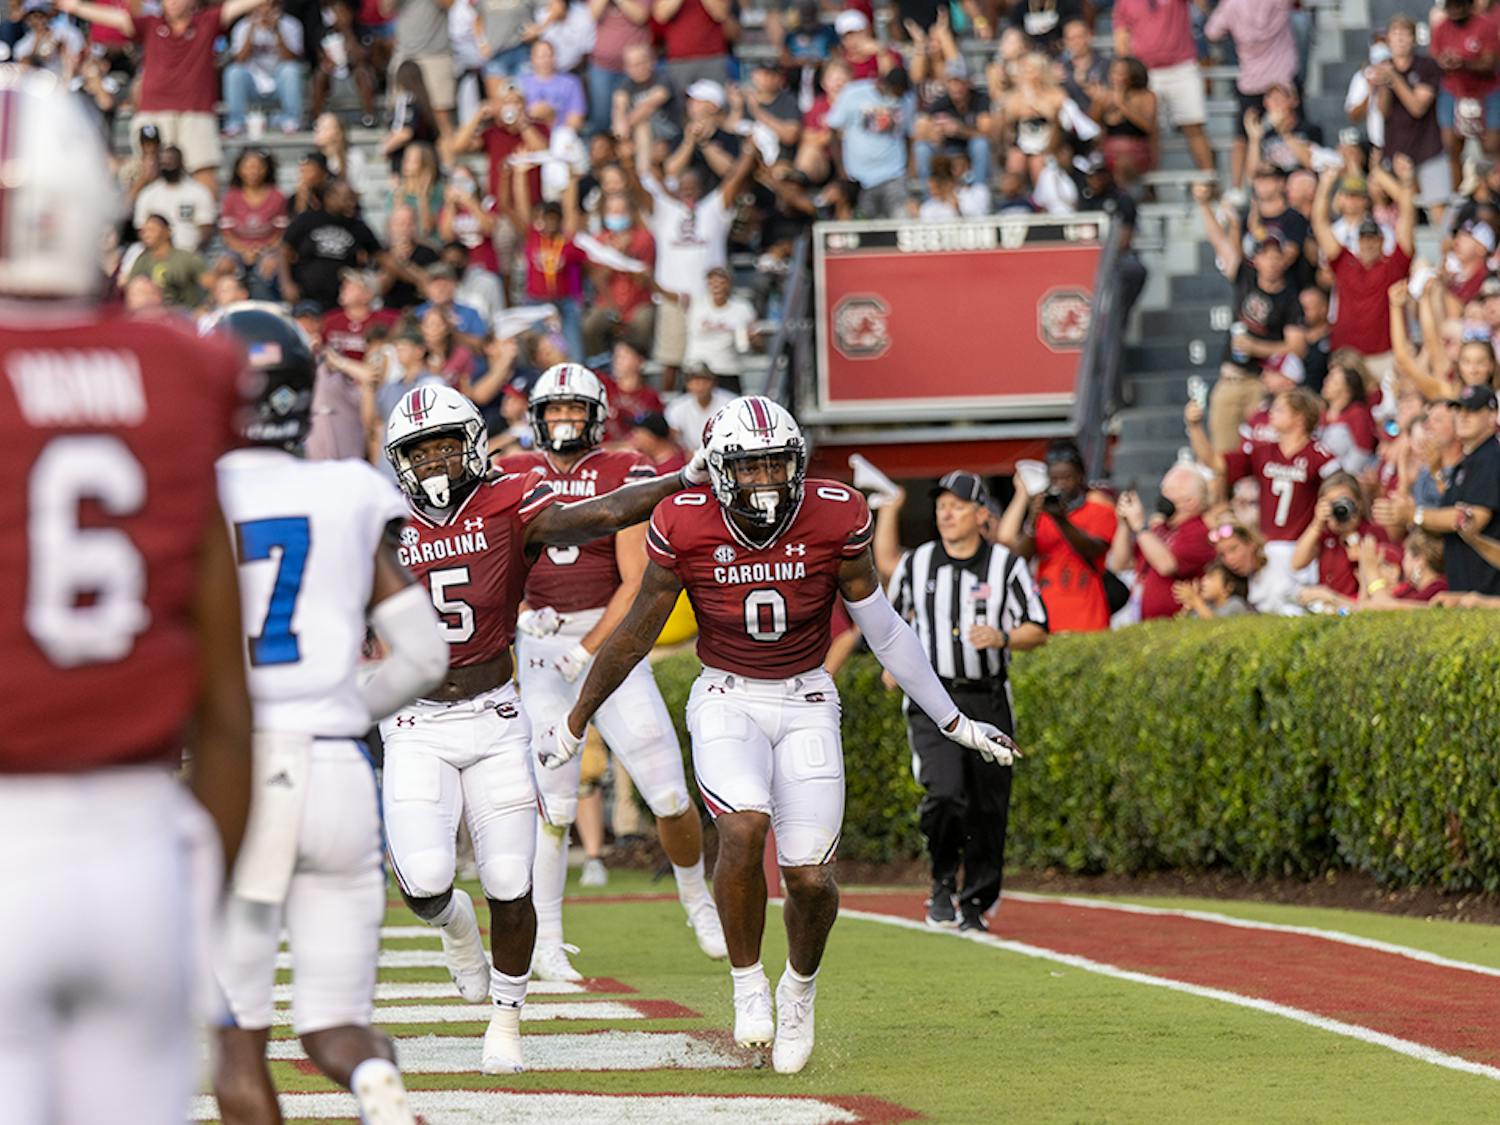 Sophomore tight end Jaheim Bell celebrates a touchdown pass from graduate student quarterback Zeb Noland. This touchdown brought the Gamecocks to 15 points at the end of the first quarter.